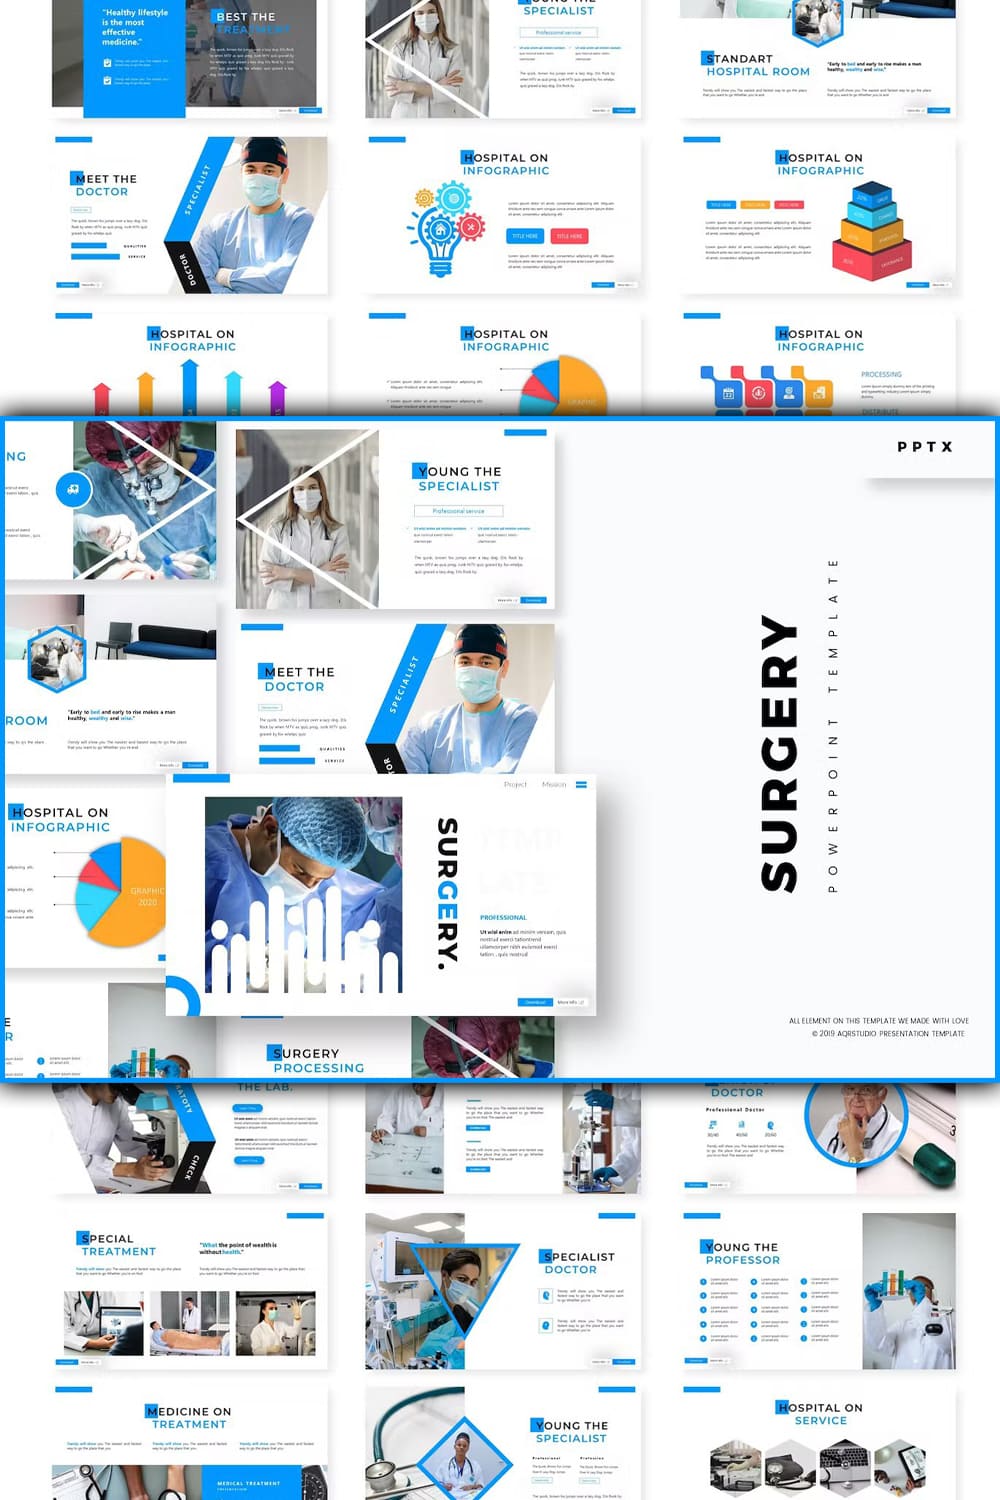 Surgery powerpoint template - pinterest image preview.